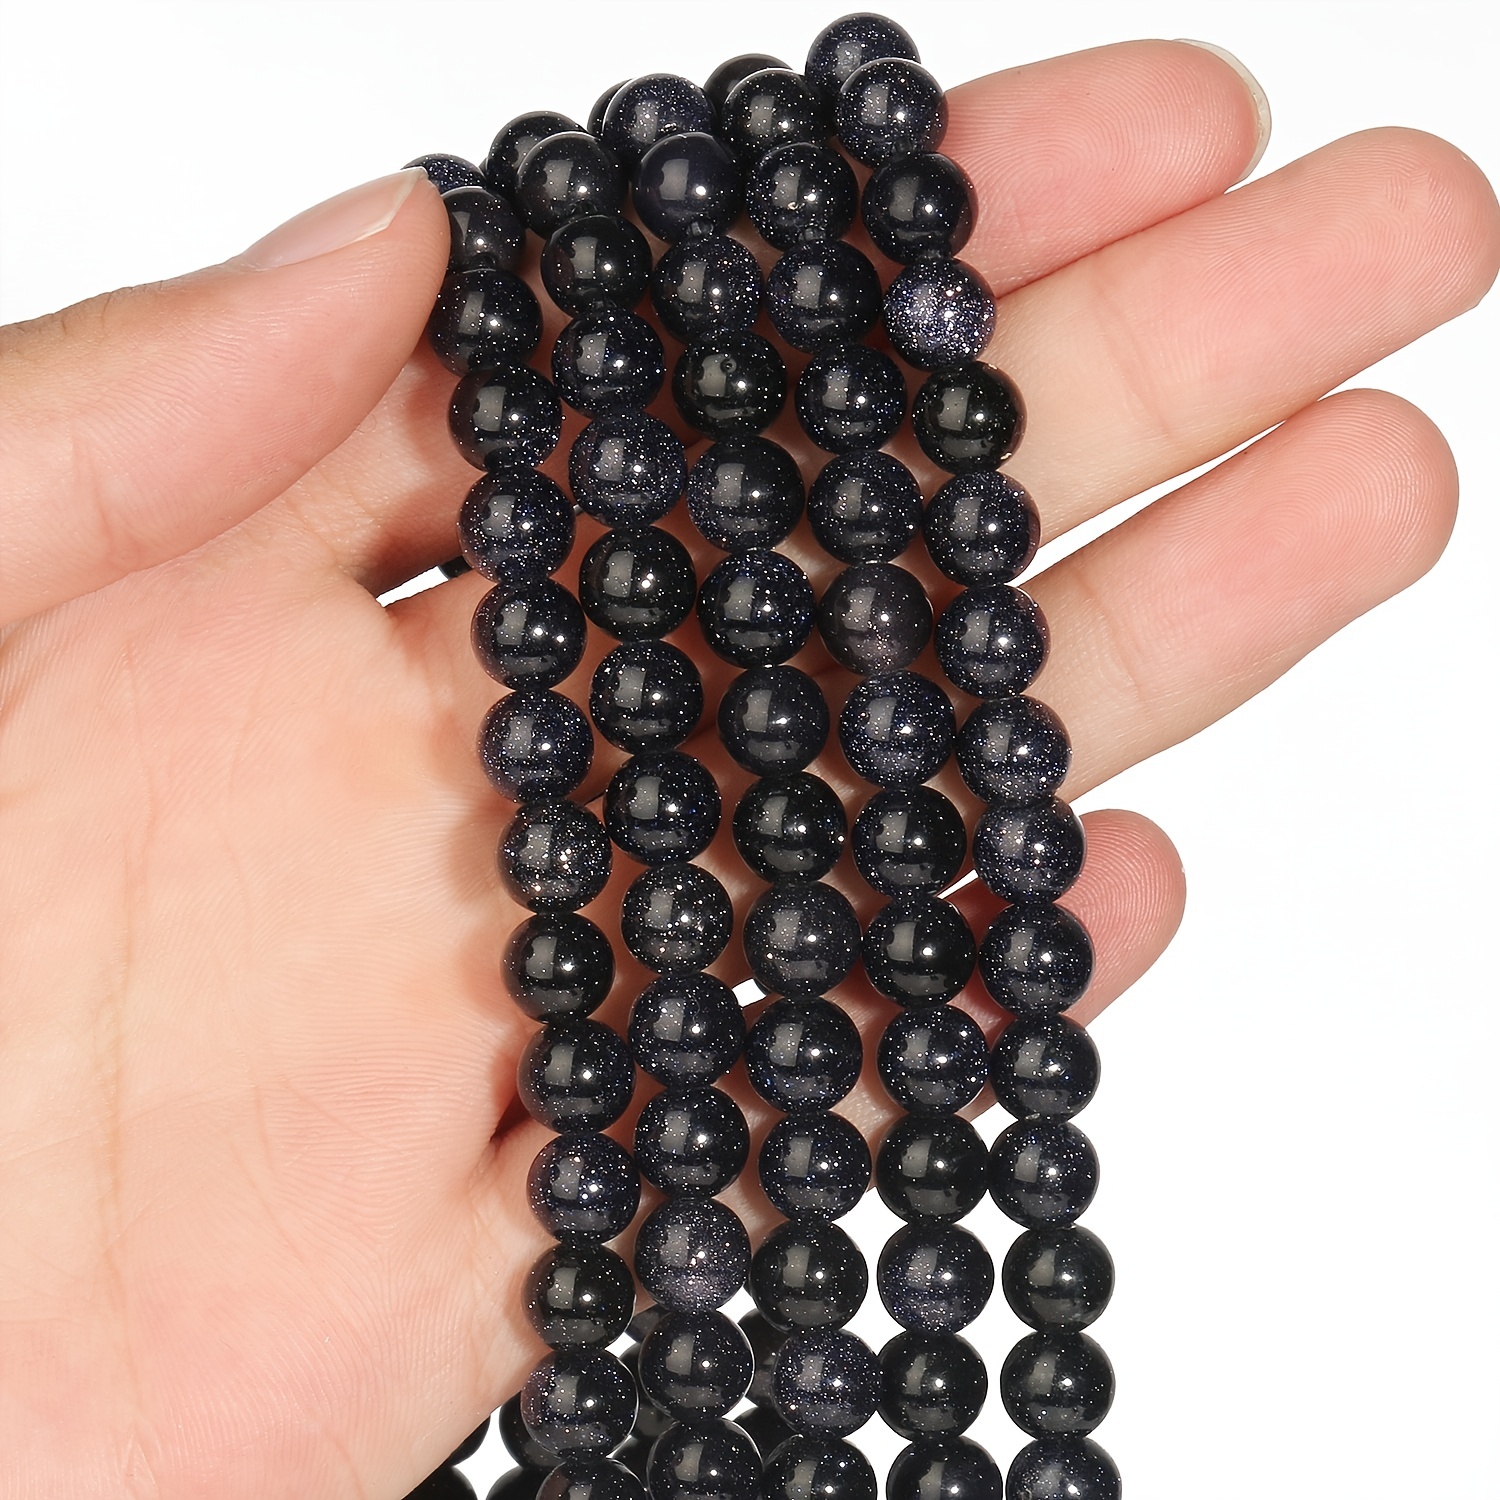 Natural Black Hematite Stone Beads Round Loose Beads For Jewelry Making 2 3  4 6 8 10 12mm Diy Bracelet Accessories 15Strand